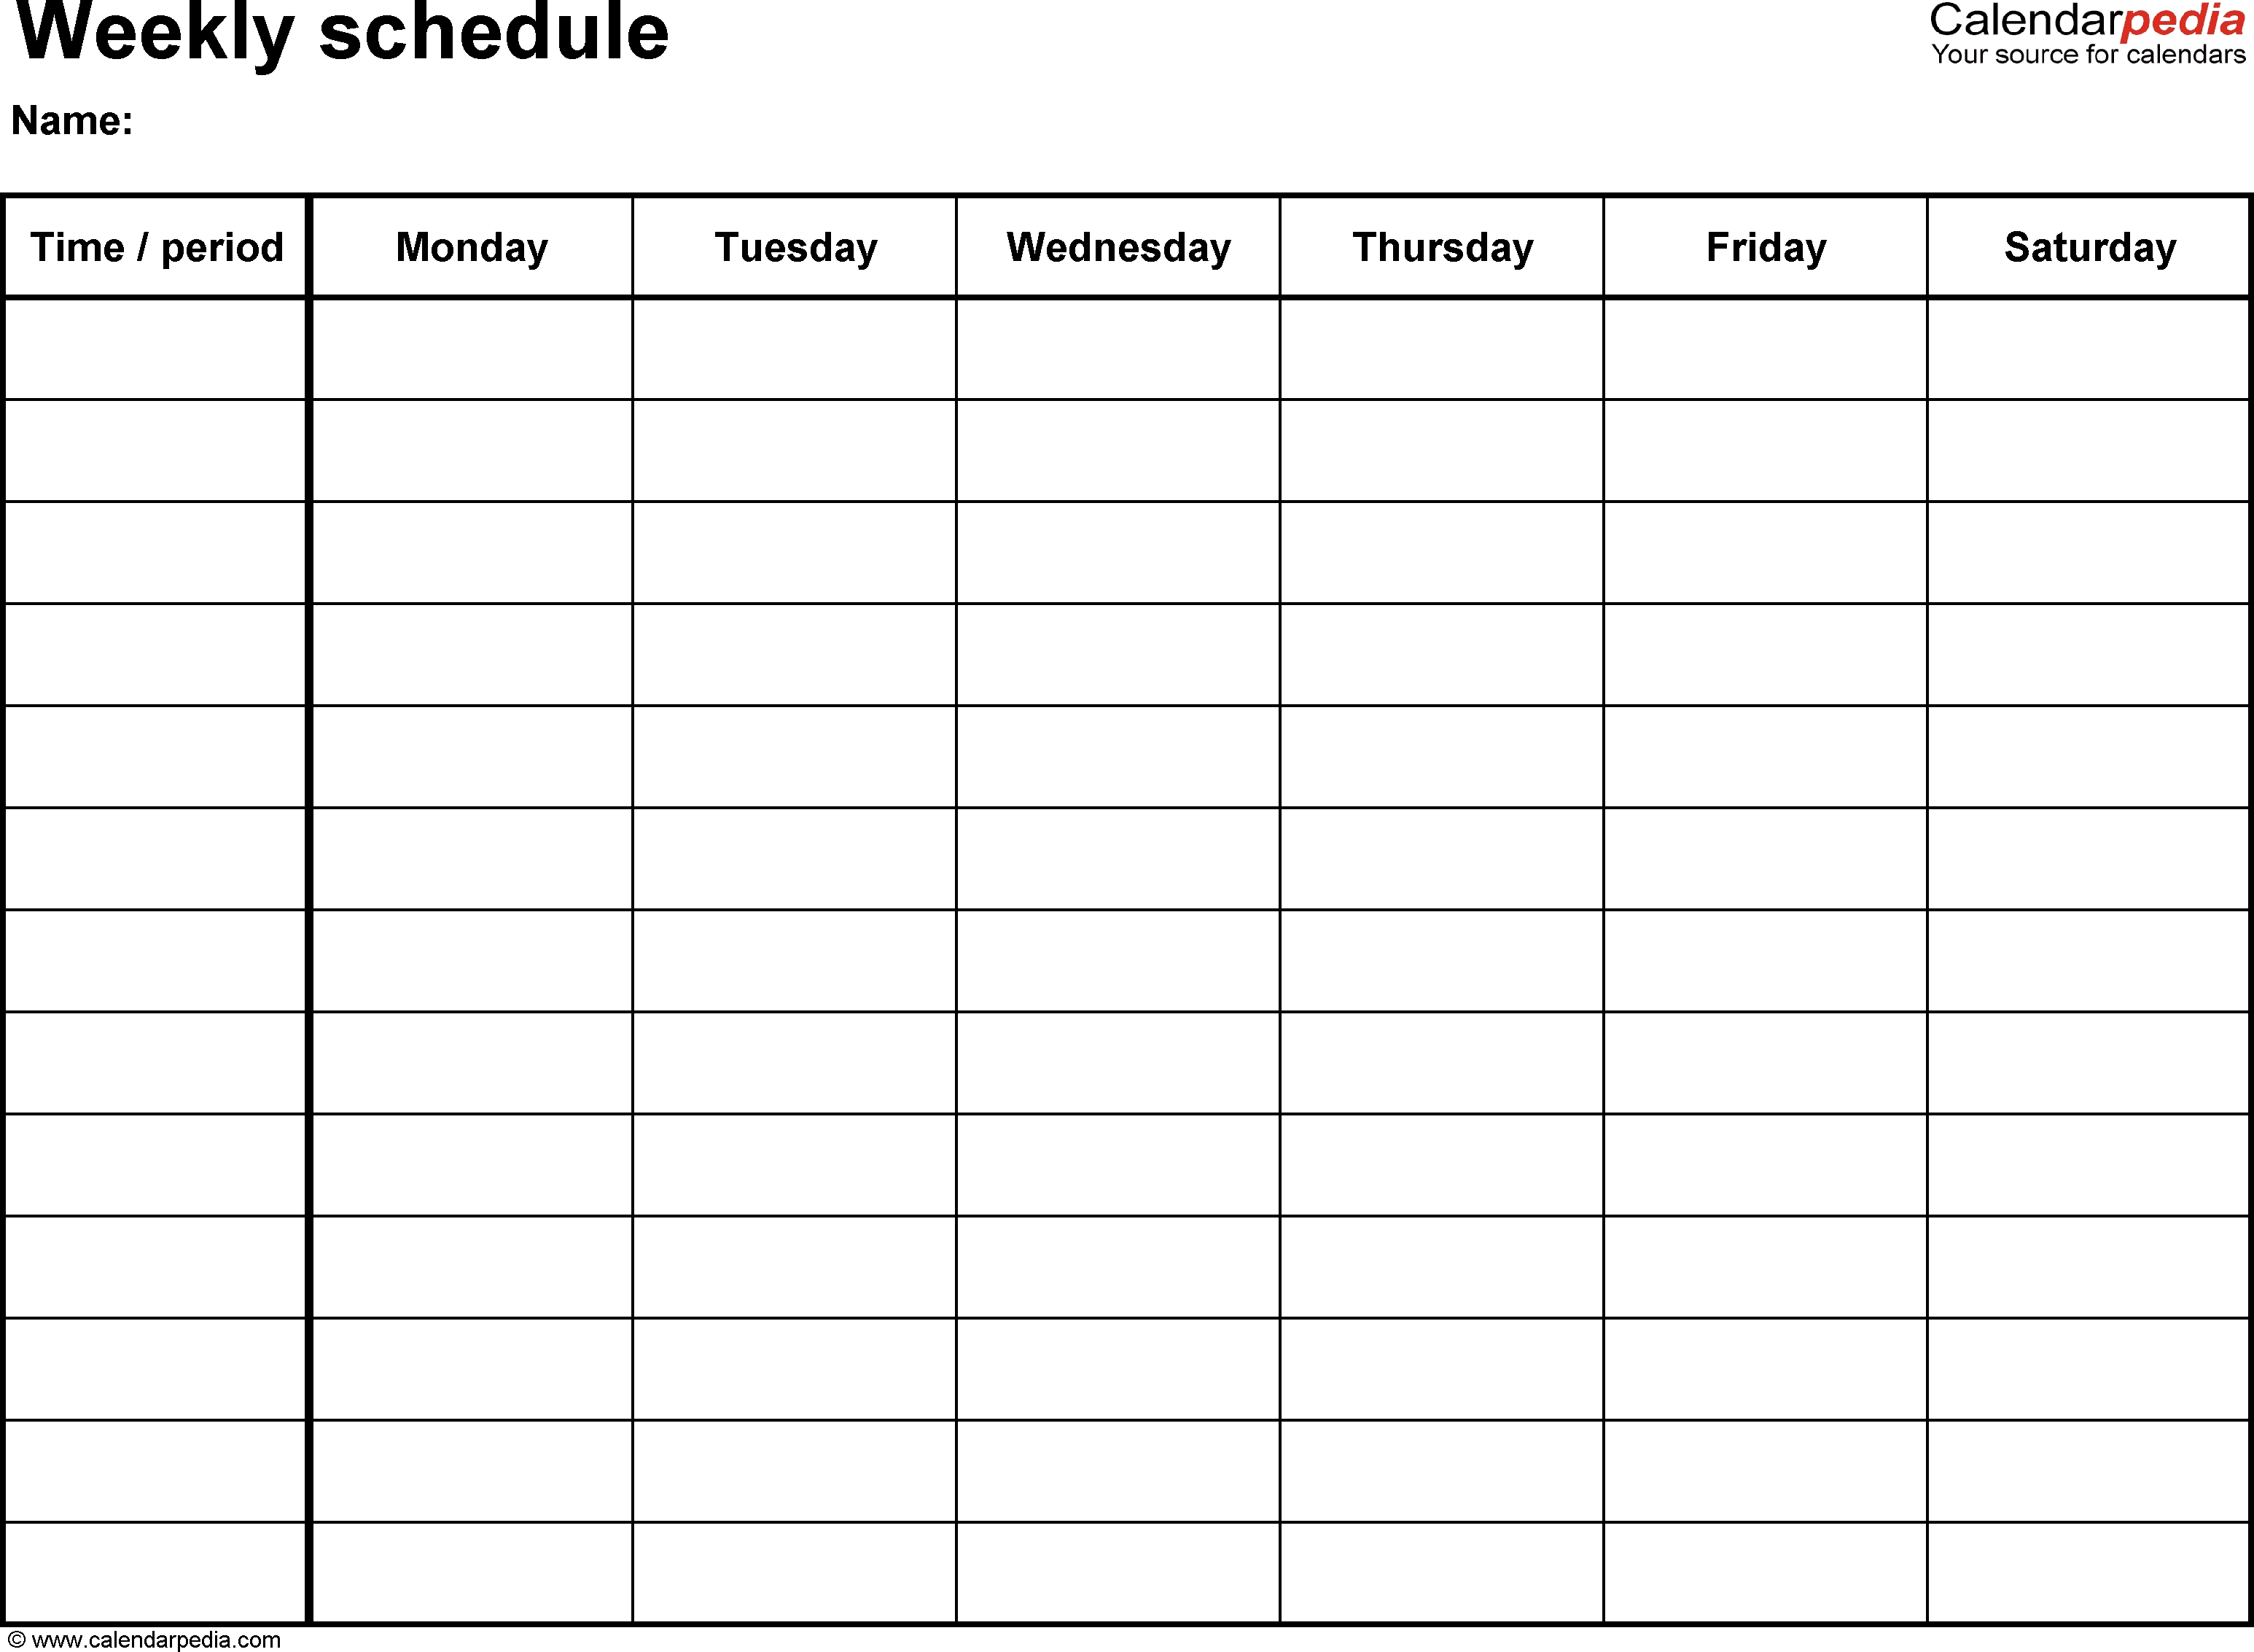 Free Weekly Schedule Templates For Pdf - 18 Templates throughout Free Printable Blank Weekly Calendars